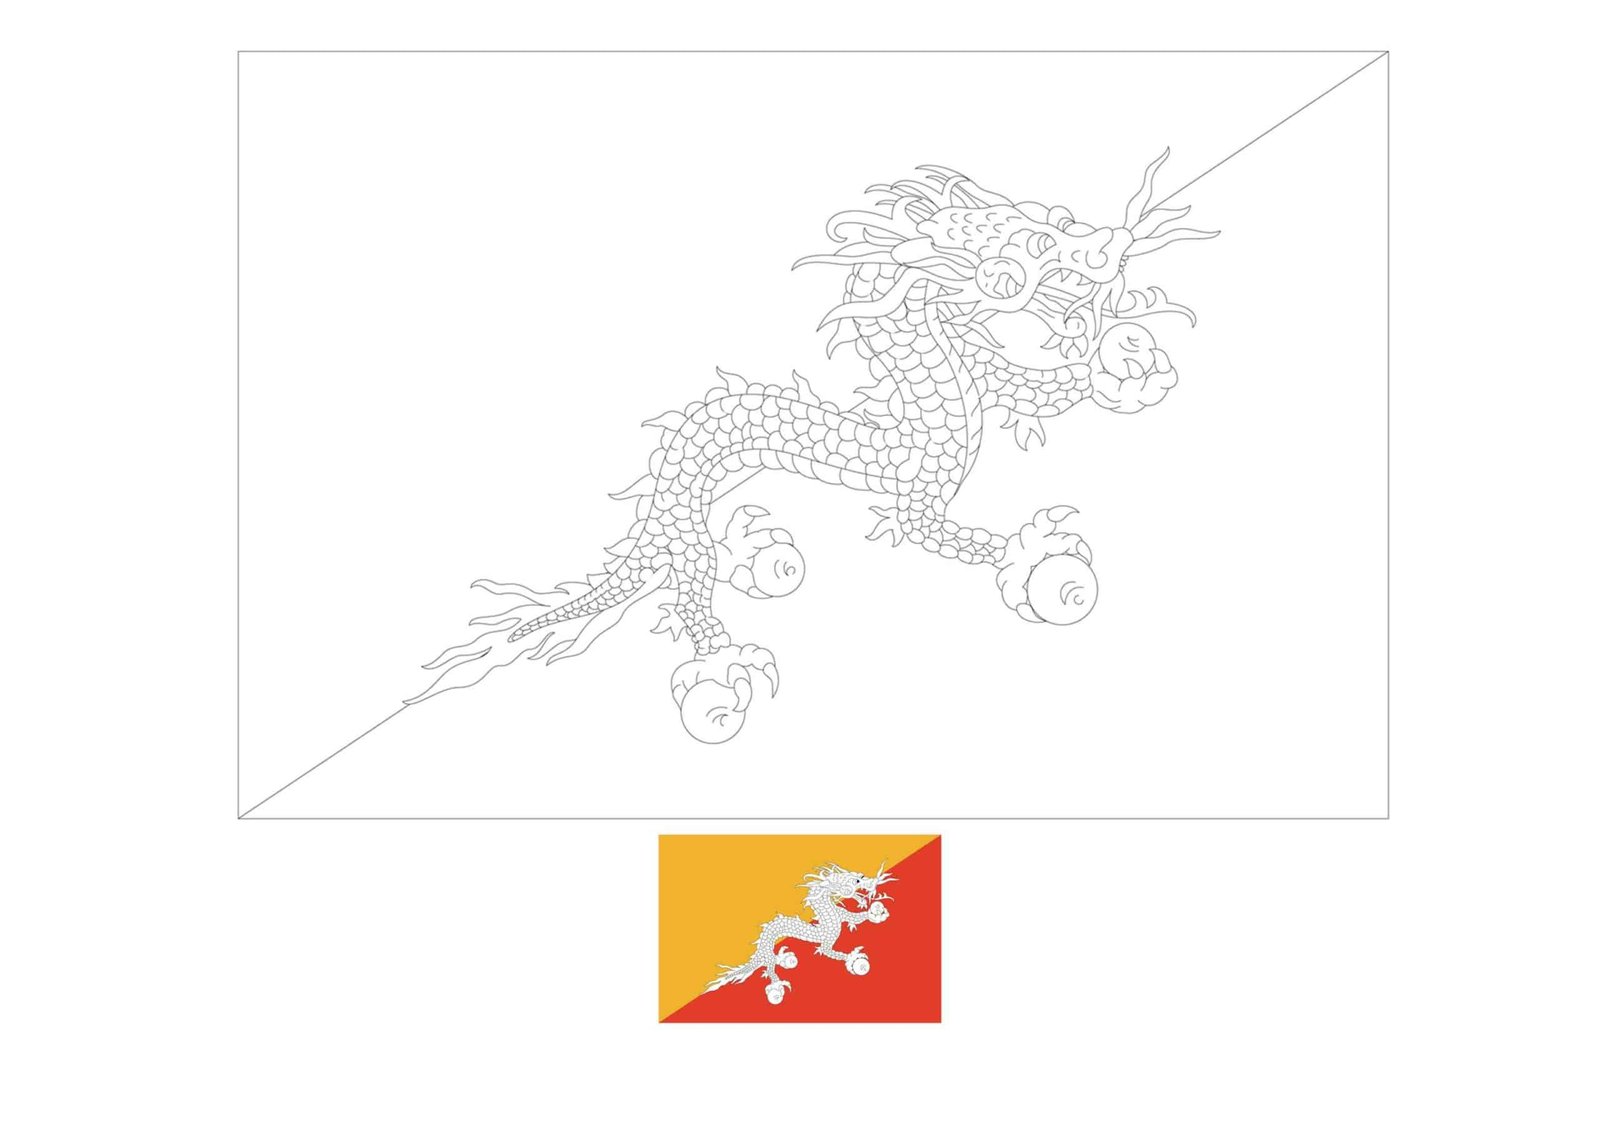 Bhutan flag coloring page with a sample